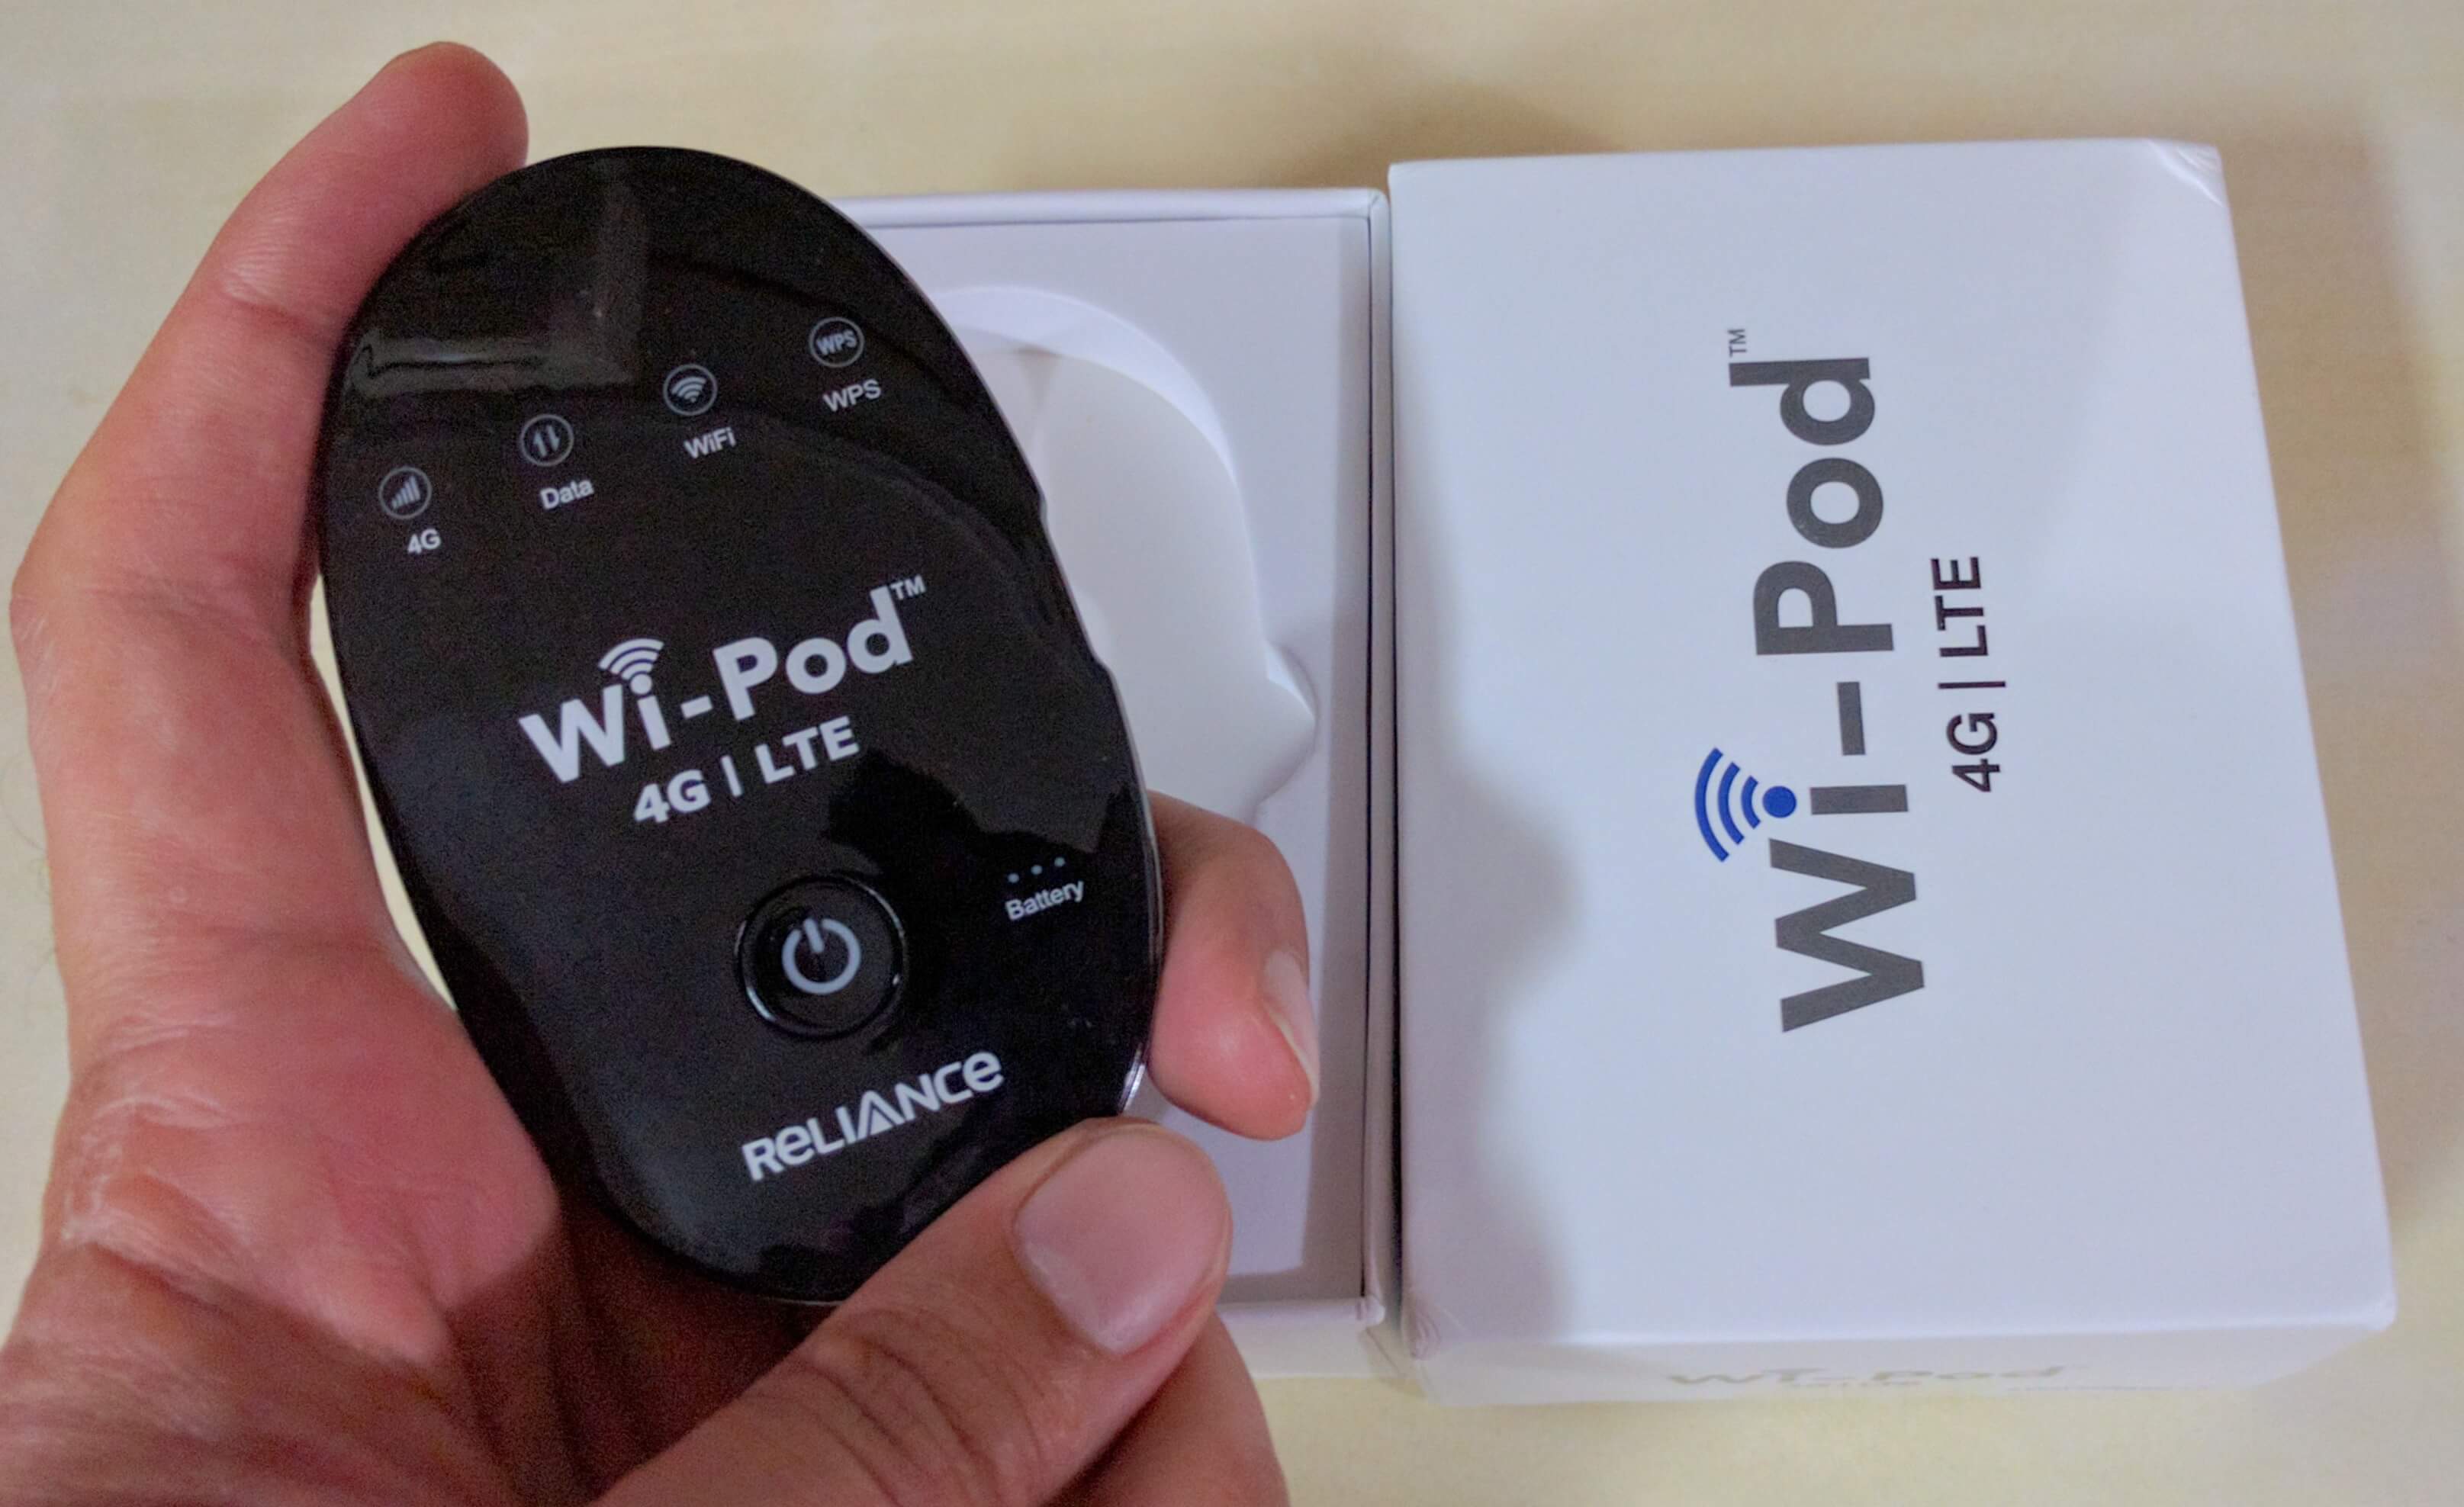 Exclusive: Hands on with Reliance Wi-Pod 4G LTE -first impressions TelecomT...